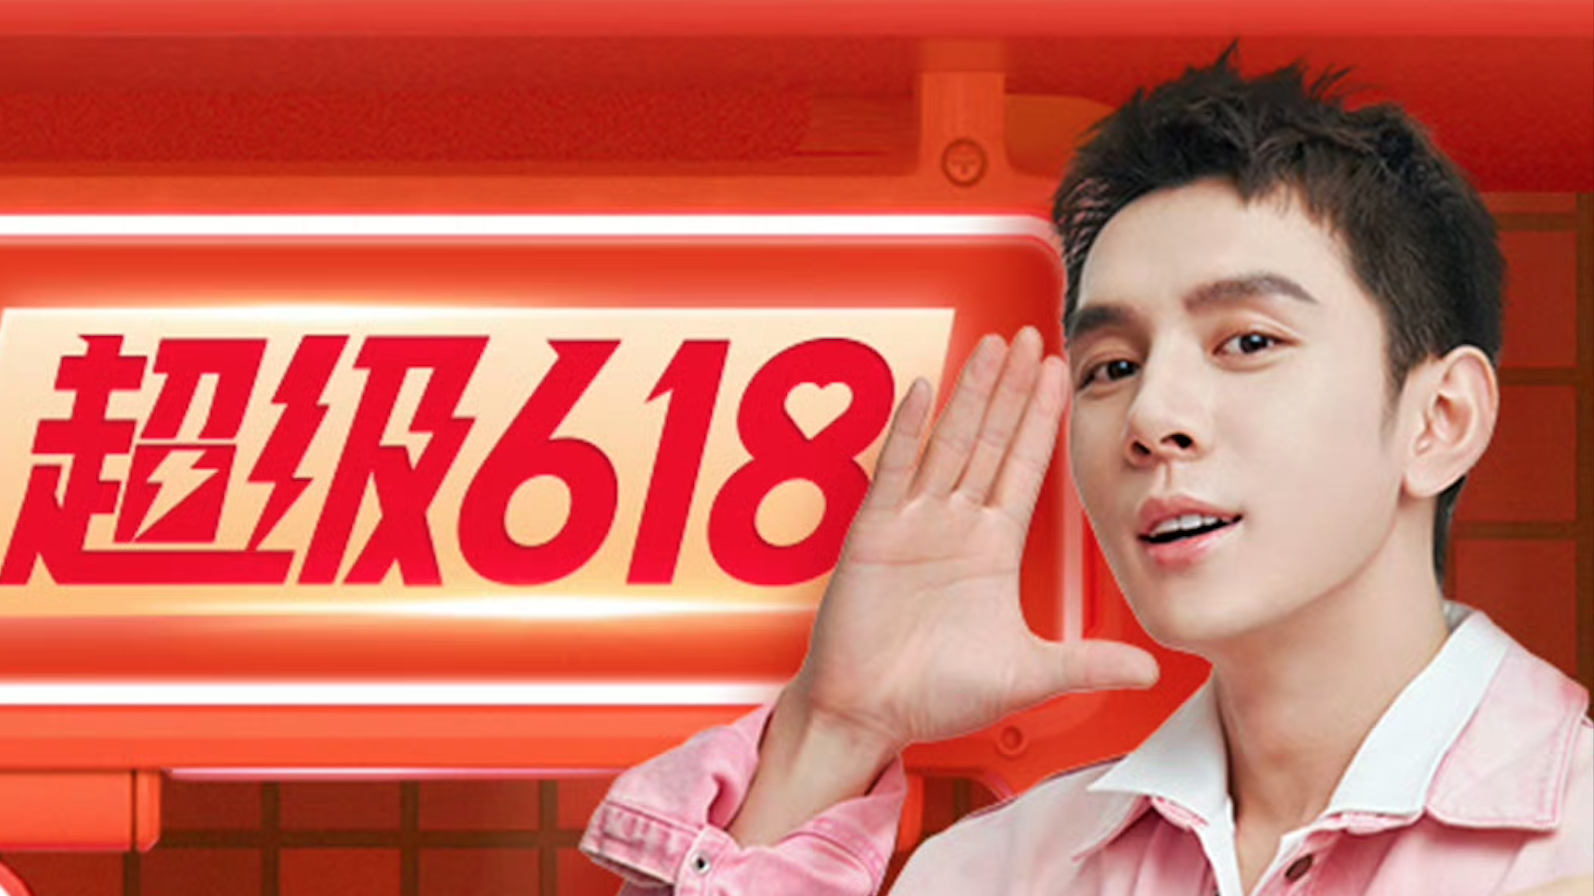 Brands stuck with the influencer after audience outrage at his wage insensitive comments during livestream. But the debacle threatens to turn consumers away as the Double 11 shopping fest nears. Image: Li Jiaqi Weibo